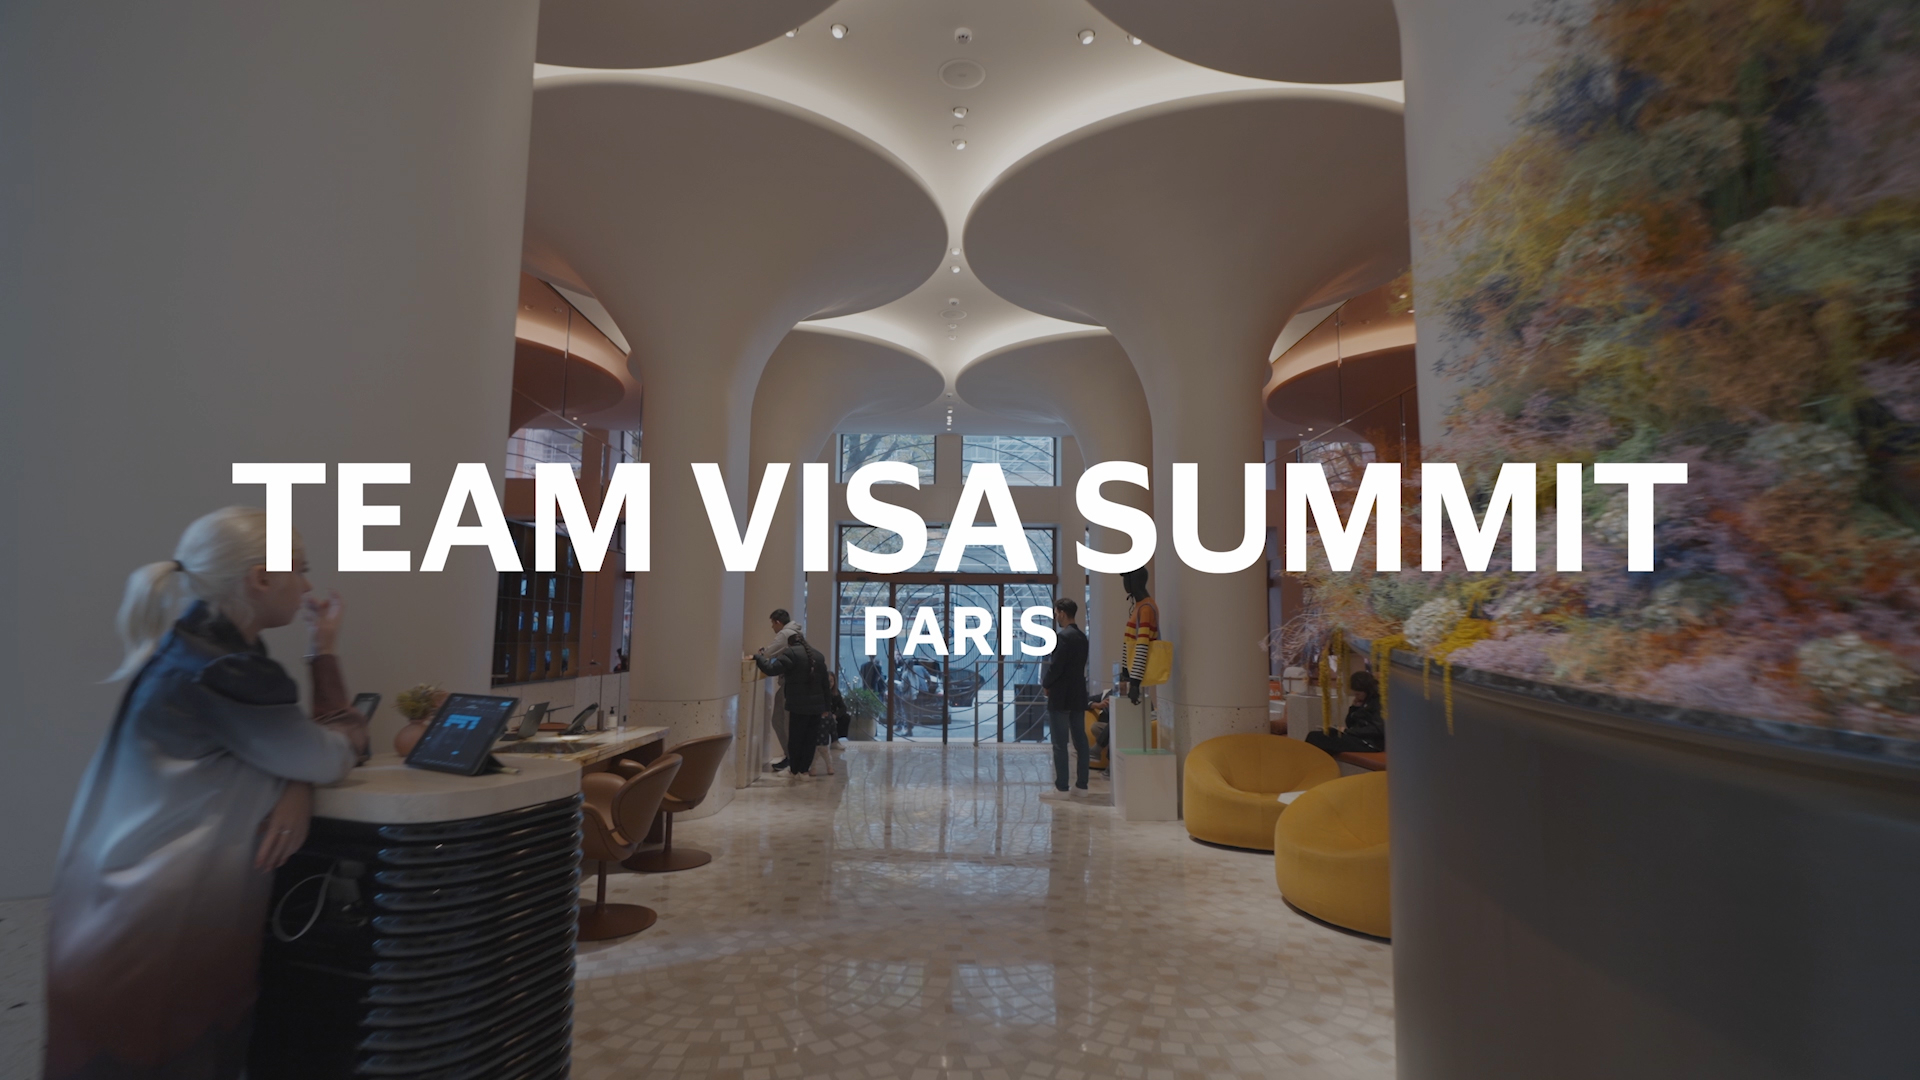 Team Visa athletes from around the world attended the Team Visa Summit in Paris for a two-day, creator-led content master class focused on brand immersion and best practices for how to tell their own stories within the broader creator economy. Team Visa for Paris 2024 is the largest and most diverse group of athletes in the program's history, featuring 117 athletes from across more than 60 markets and 40 sports.